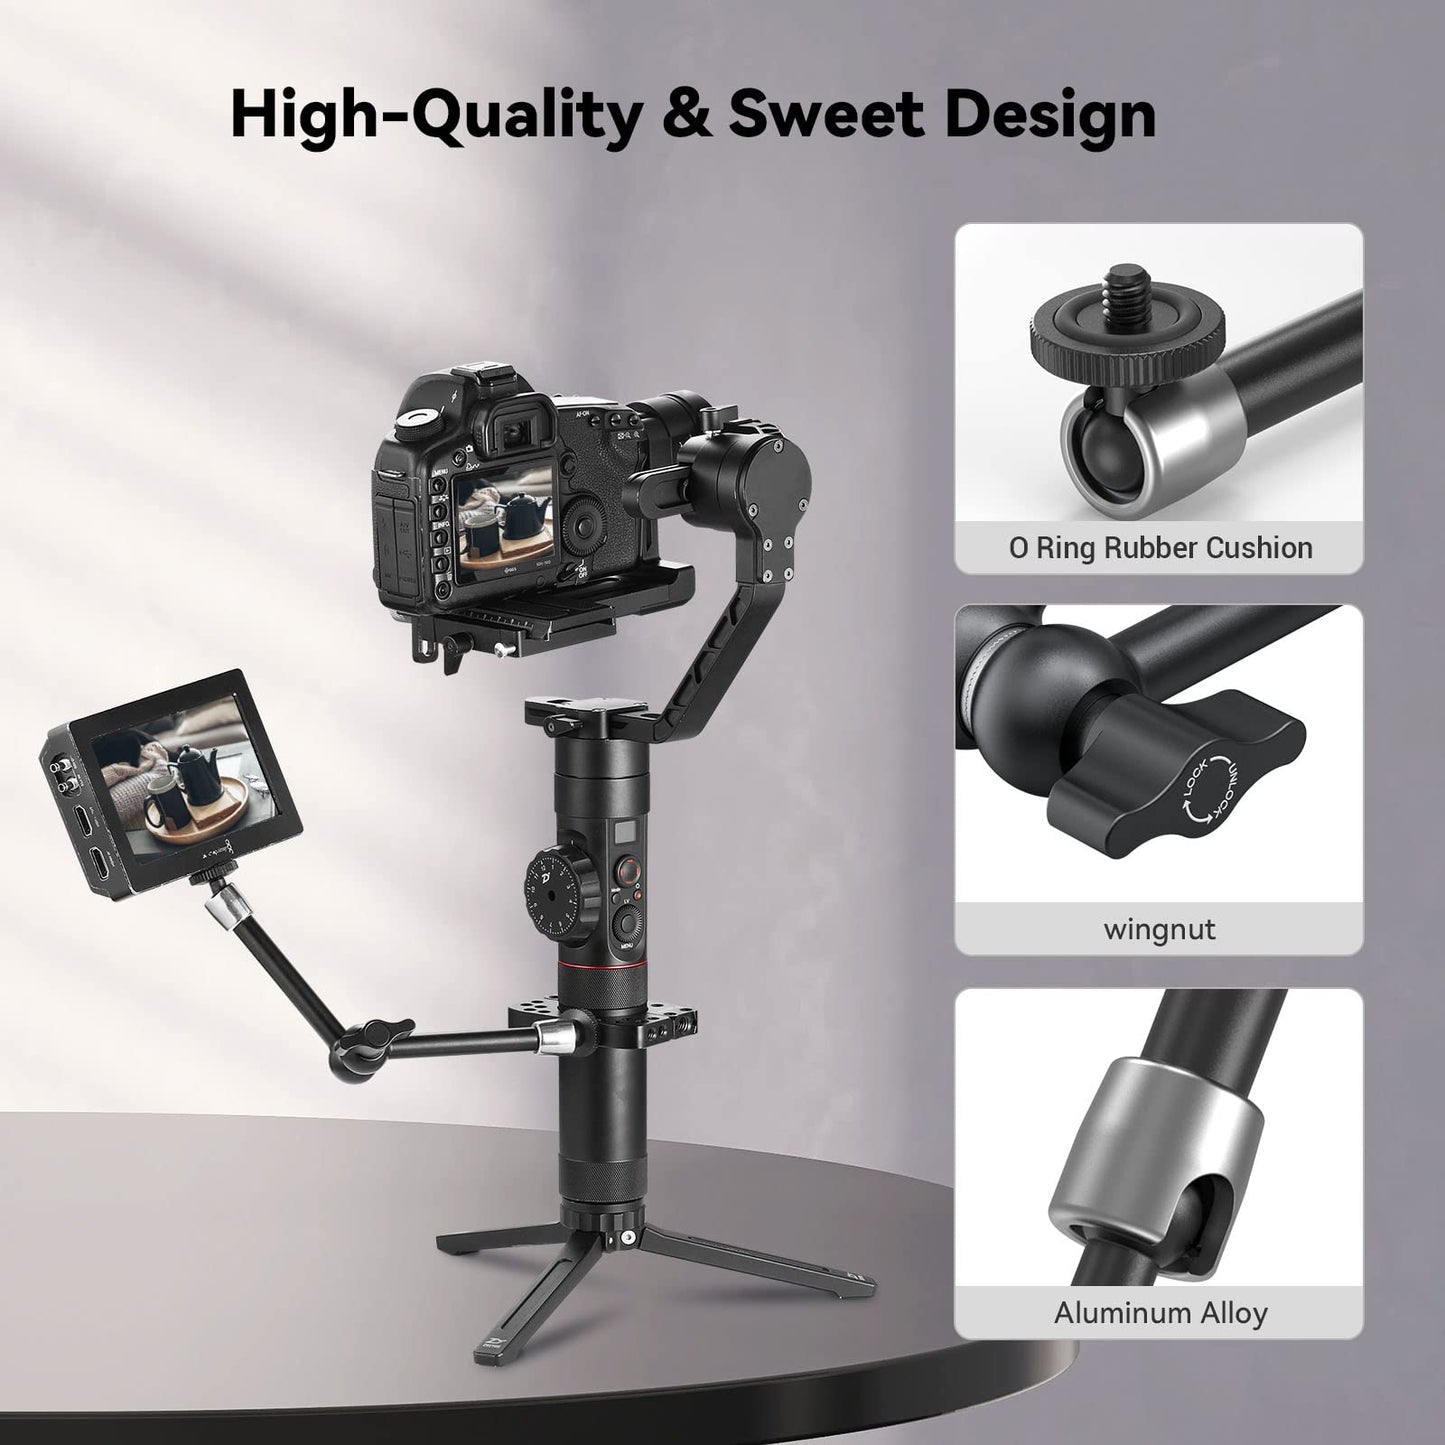 SmallRig 9.8 inch Adjustable Articulating Magic Arm with Both 1/4" Thread Screw for LCD Monitor/LED Lights - 2066B